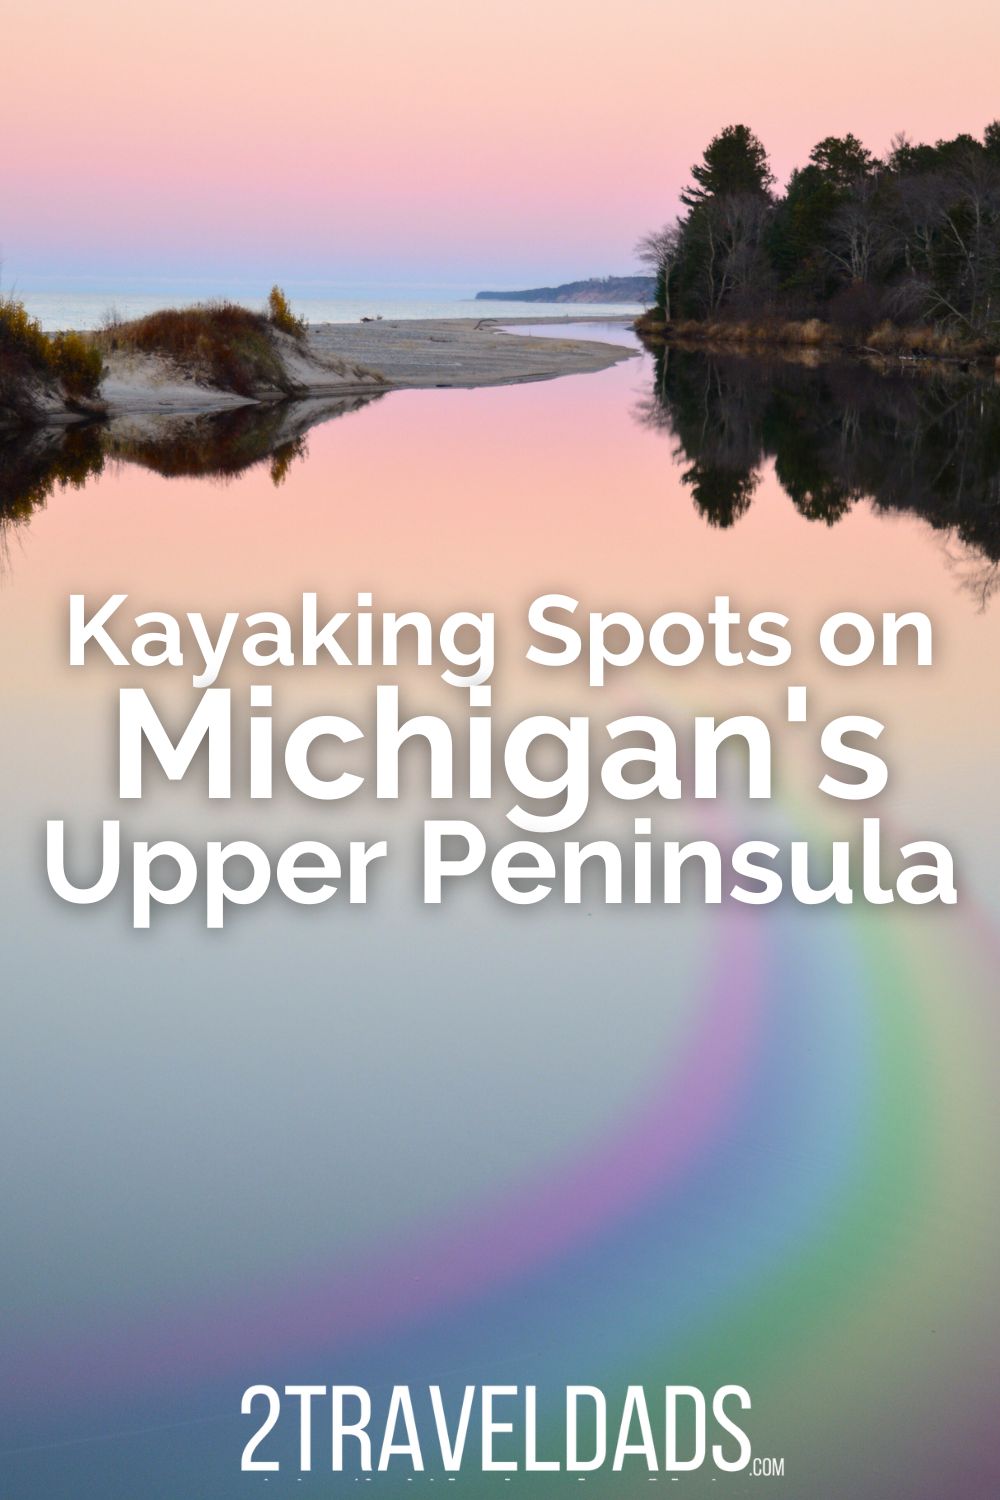 Kayaking on Michigan's Upper Peninsula (the UP) is a beautiful thing to do on a summer trip. From quiet bays on the Great Lakes to beautiful rivers, see what awesome kayaking spots you'll find on the Upper Peninsula of Michigan.